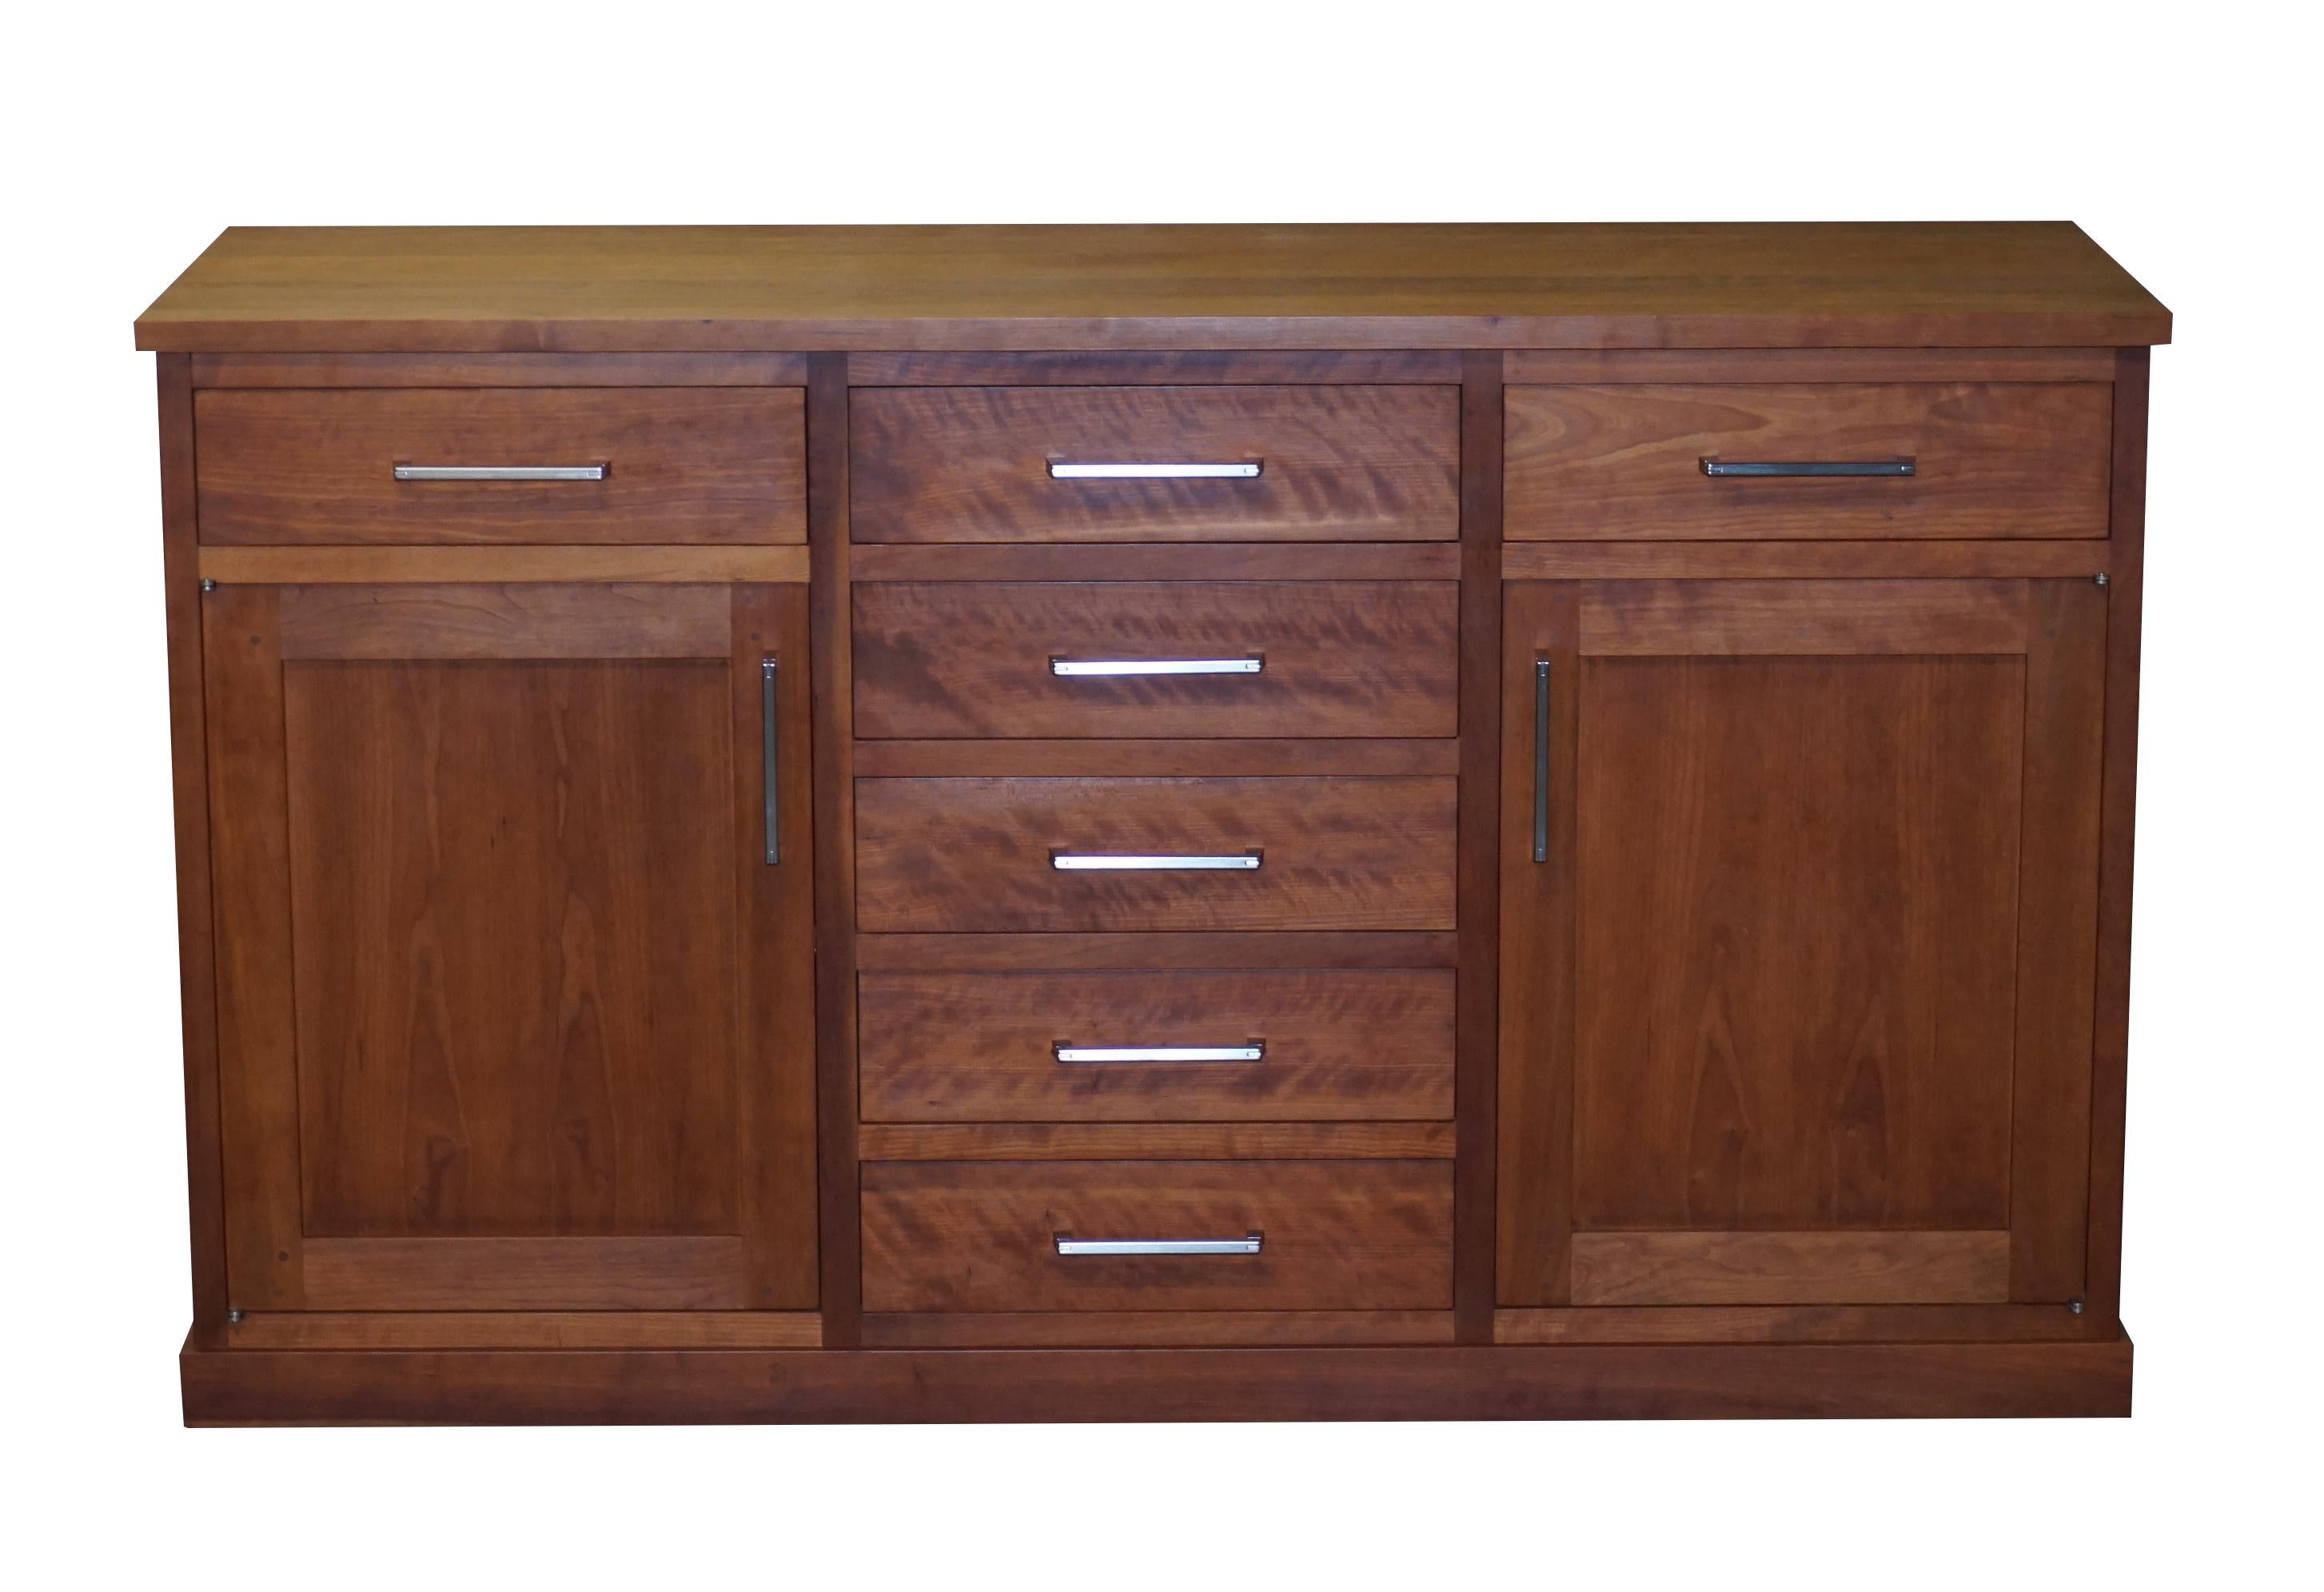 Wimbledon-Furniture is delighted to offer for sale this stunning hand made in Italy Riva 1920 solid American black Cherry wood sideboard with drawers

This is a very well made totally solid piece, it weighs a tonne, complete with two shelves and